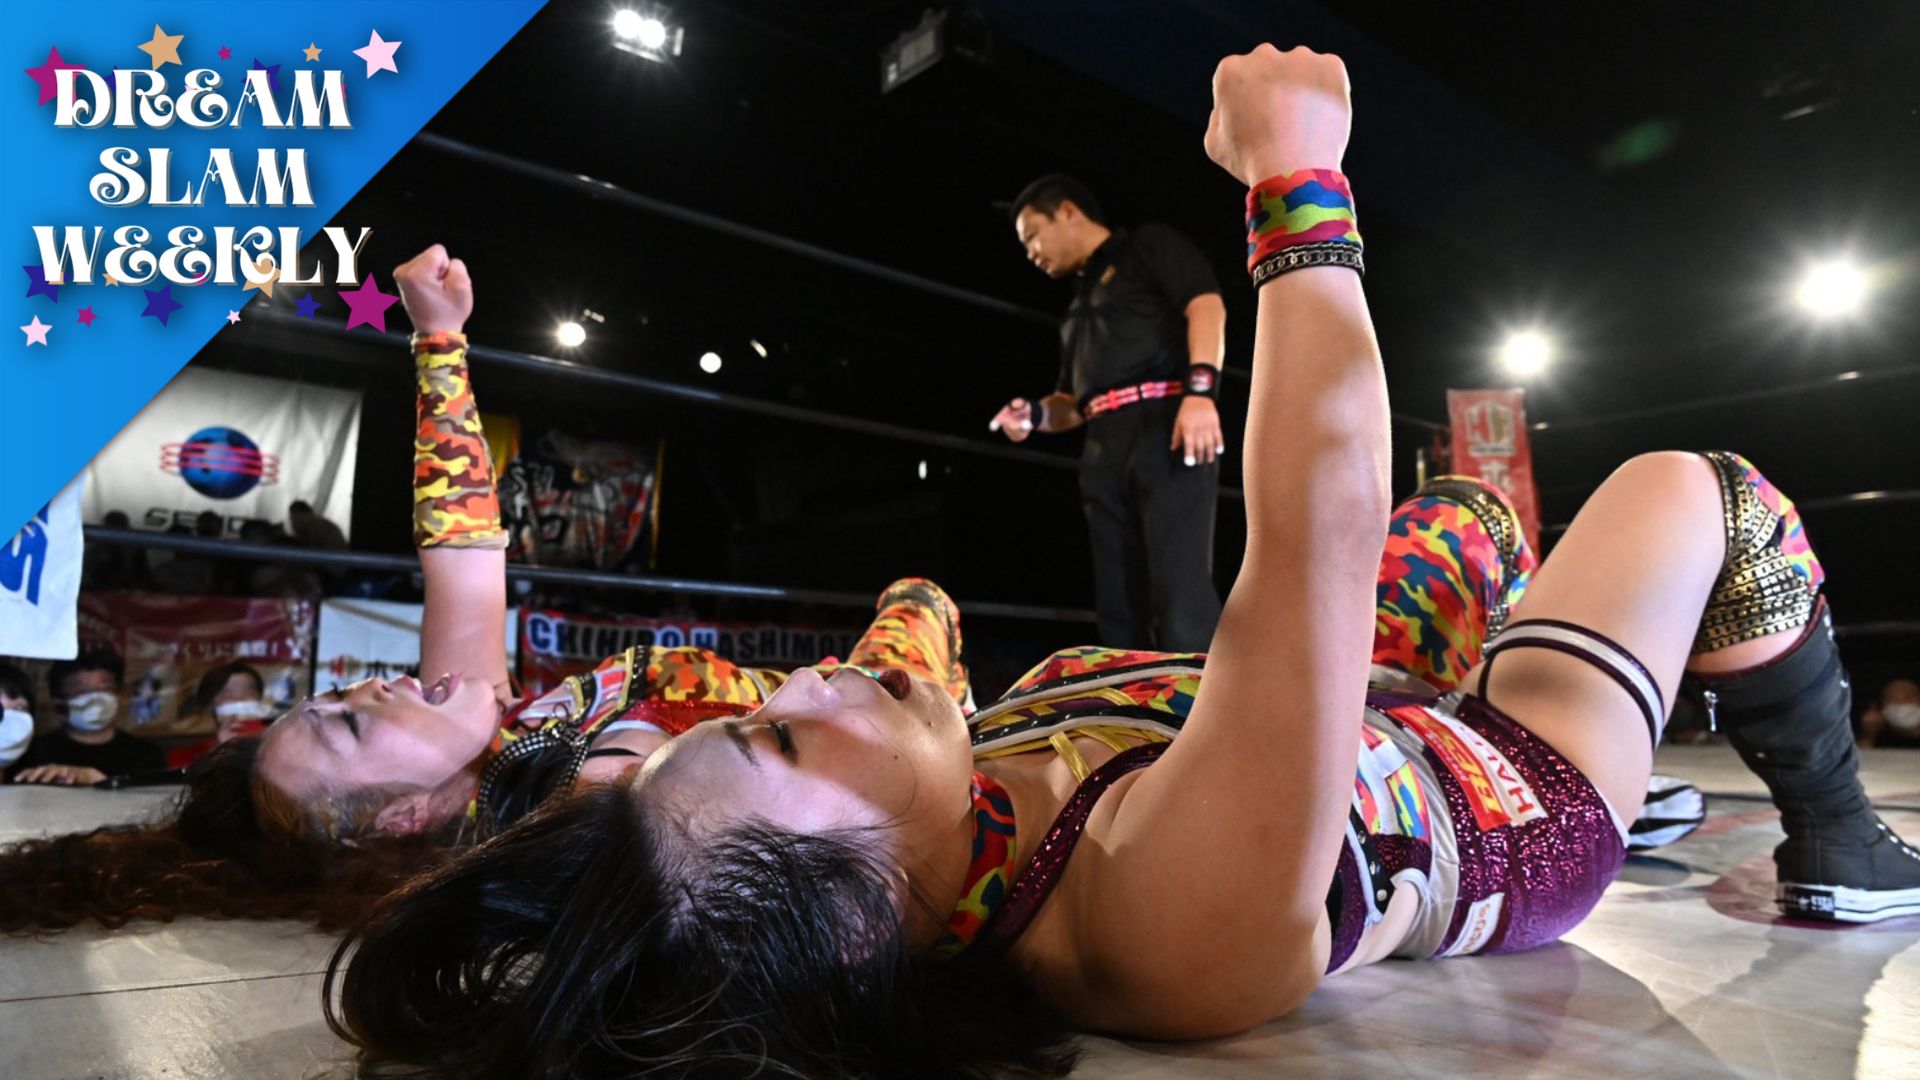 Q&A with Mei Suruga and Baliyan Akki, on tag-team wrestling and